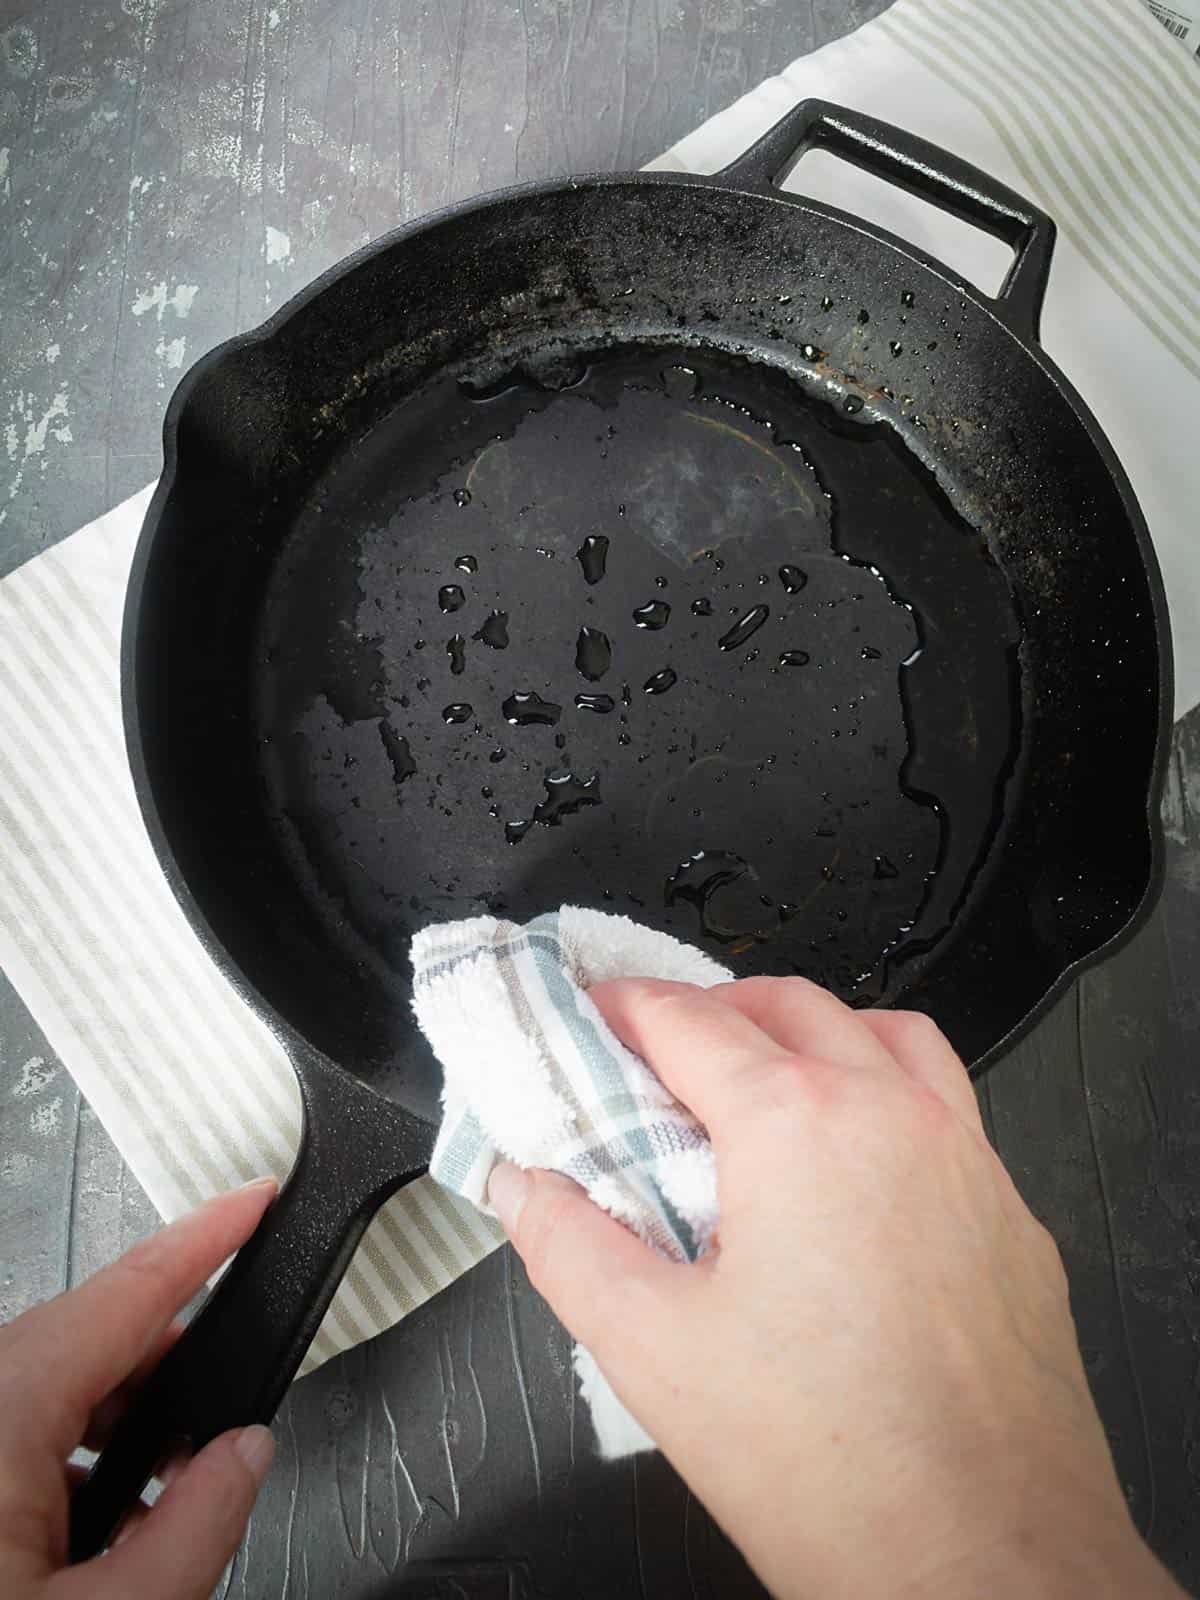 Wiping iron skillet with wet kitchen towel.